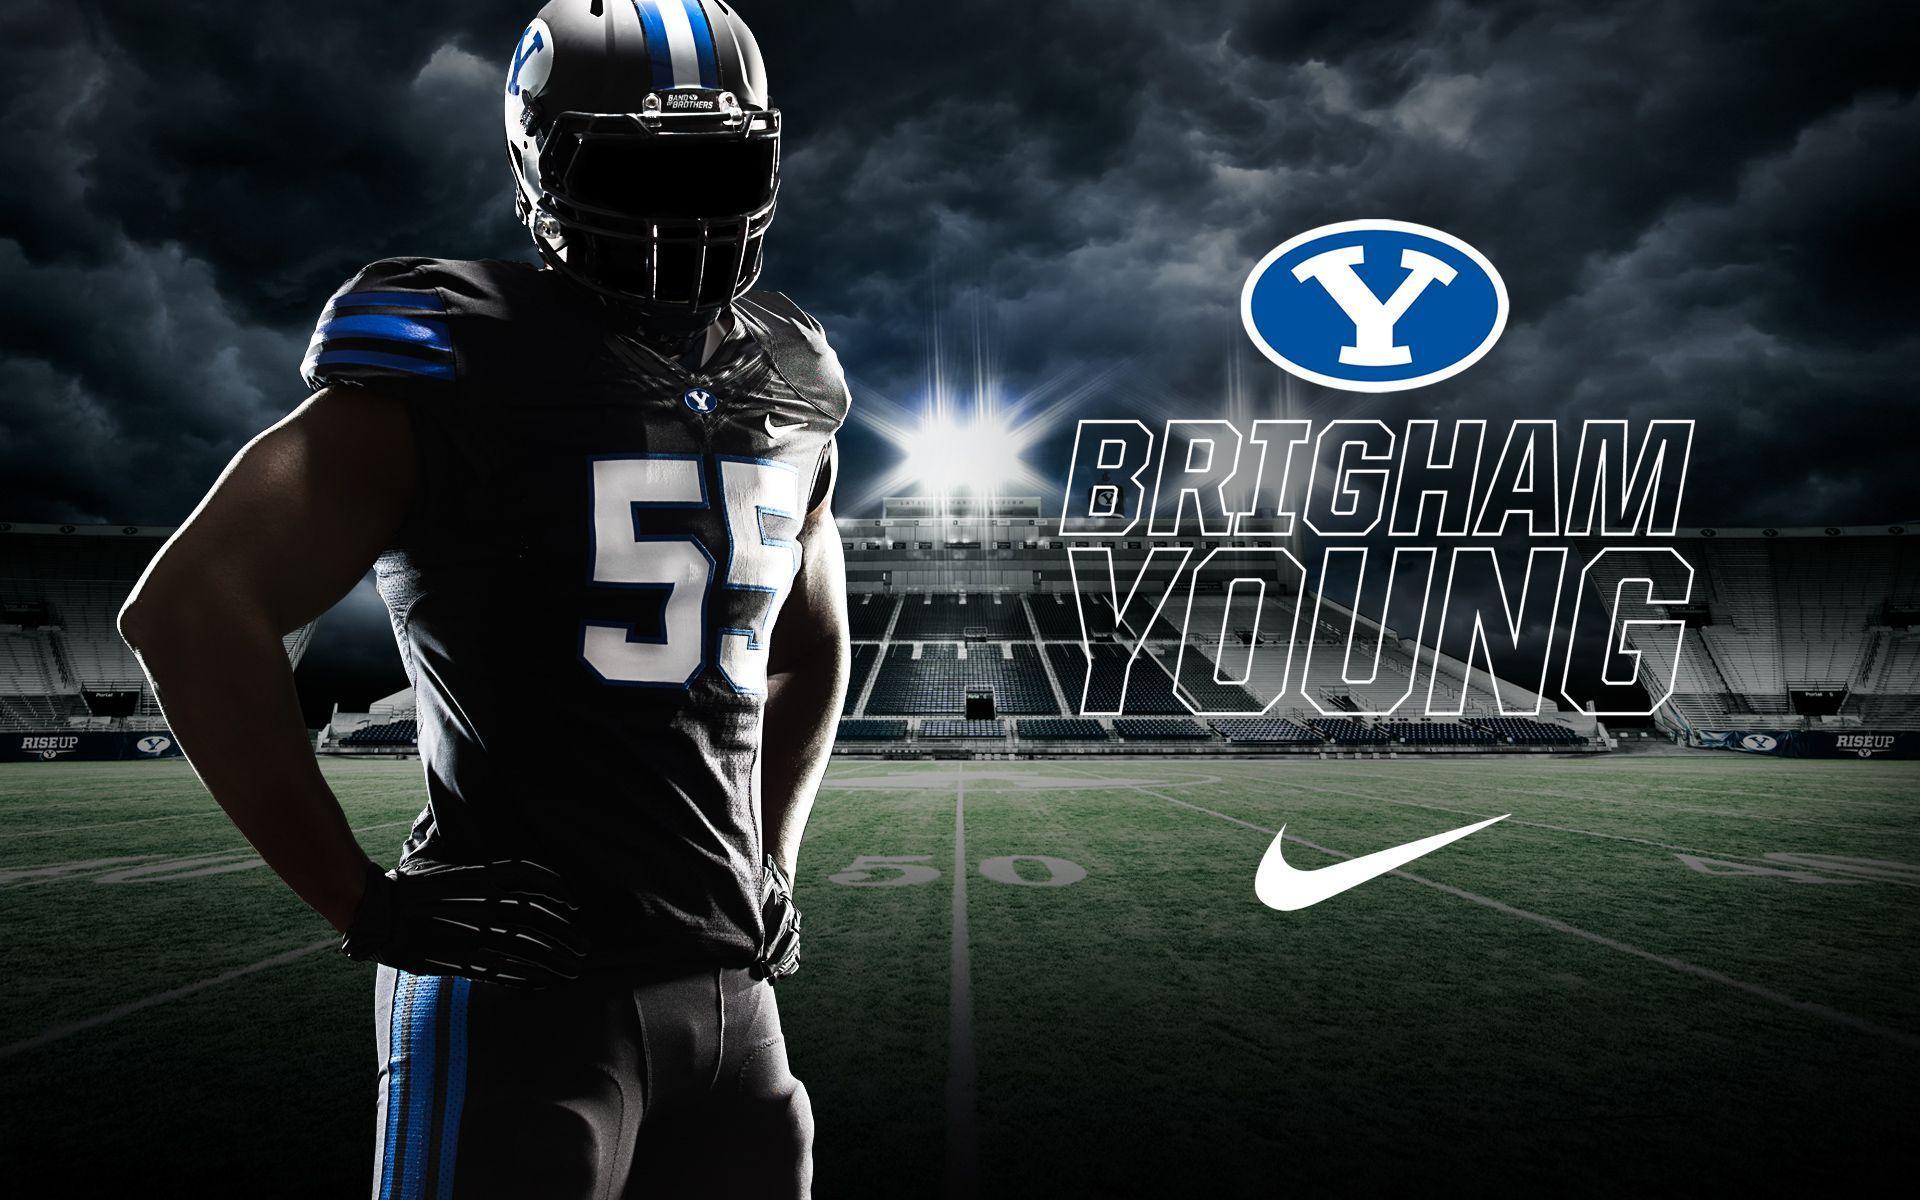 2016 Byu Football Schedule Backgrounds - Wallpaper Cave